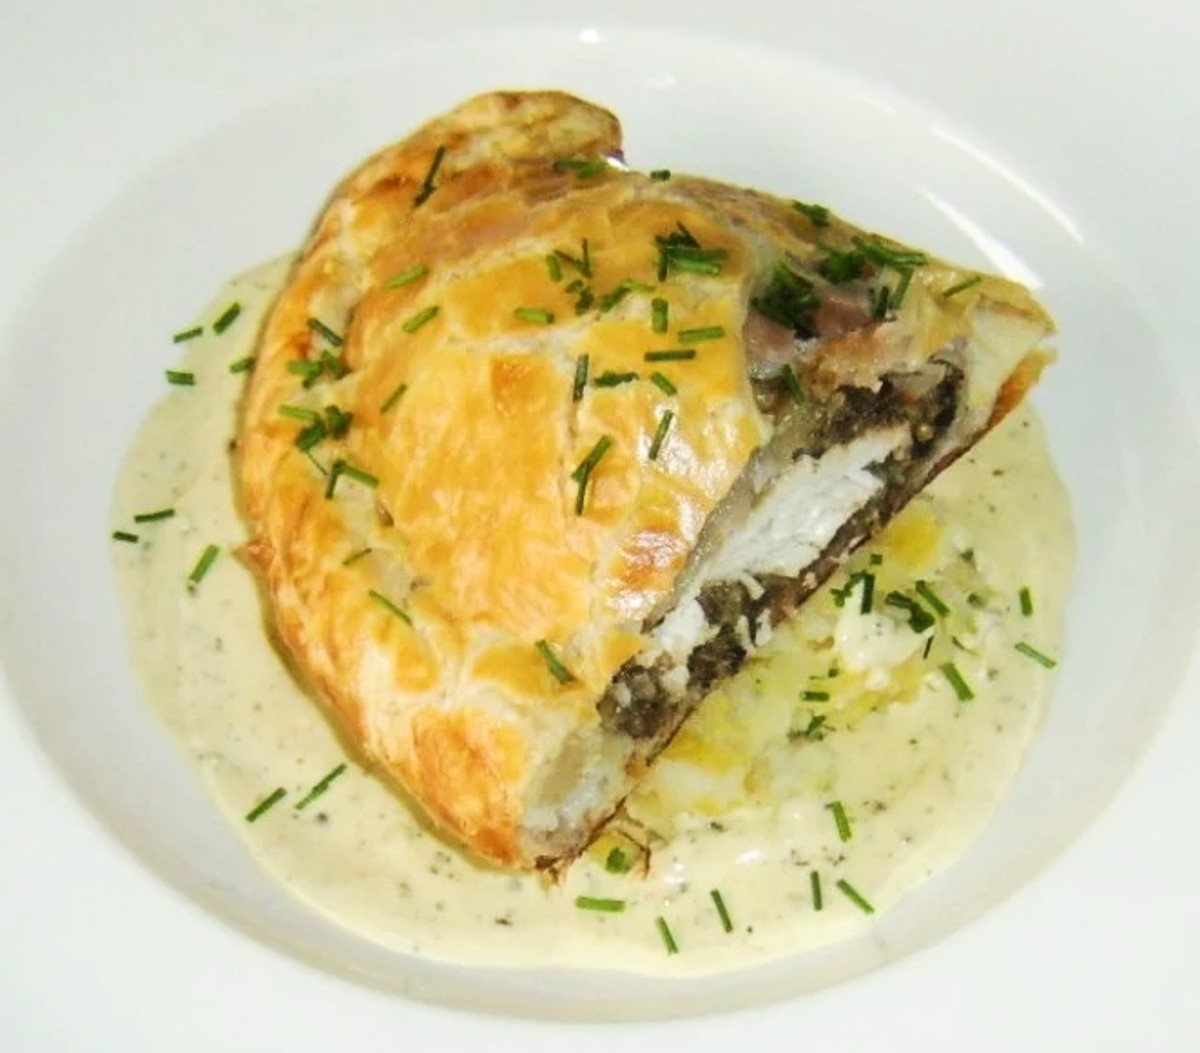 Balmoral Chicken Pasty With Clapshot and Peppercorn Sauce Recipe